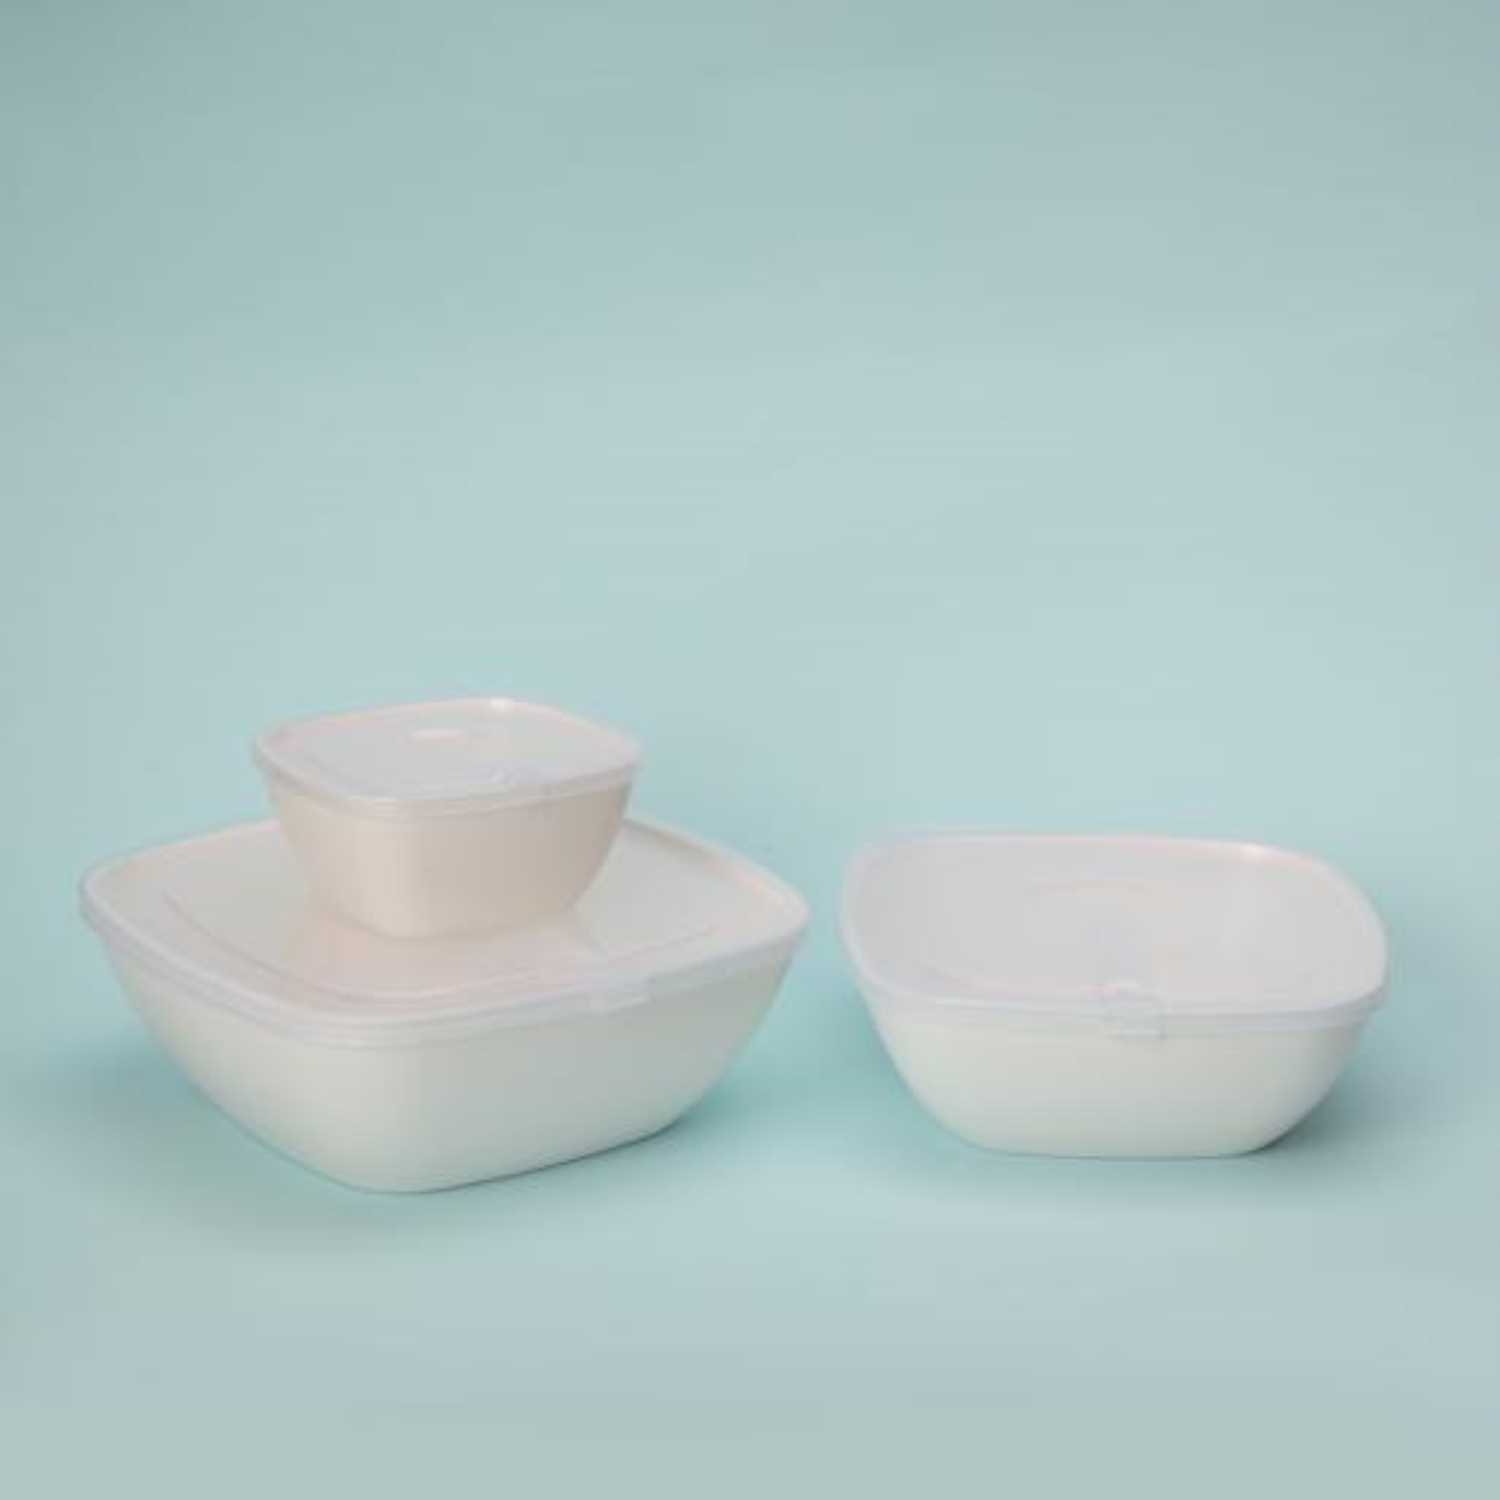 Royalford 3Pcs Bowl Set With Air-Tight Lid, Food Container, Rf11008 | Classic Prep Bowls With Lids | Food Storage Container | Versatile Bowls For Kitchen, Microwave Safe